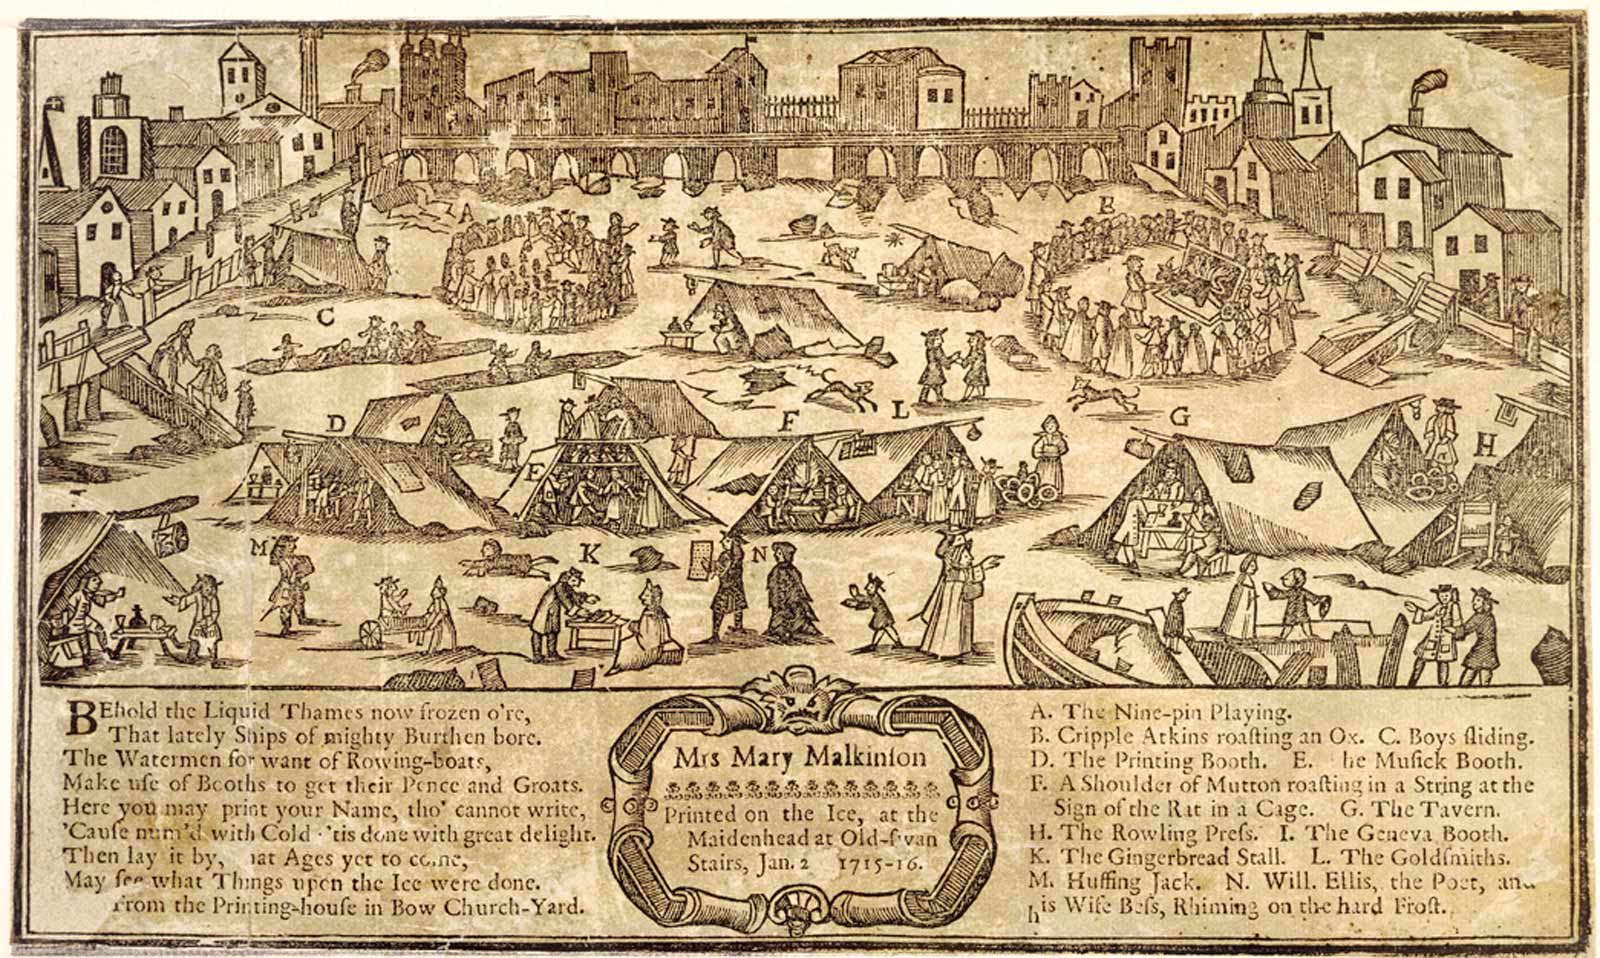 The frost fair on the river Thames in 1715-1716. Woodcut. This view is taken from near Temple Stairs, with Old London Bridge in the background, with many people and tents in the foreground. Many of these individual tents are lettered, indicating what amusements can be had on the ice. A. The Nine-pin Playing; B. Cripple Atkins roasting an Ox; C. Boys sliding; D. The Printing Booth; E. The Musick Booth; F. A shoulder of Mutton roasting in a String at the sign of the Rat in a Cage; G. The Tavern; H. The Rowling Press; I. The Geneva Booth; K. The Gingerbread Stall; L. The Goldsmiths; M. Hussing Jack; N. Will. Ellis, the Poet, and his Wife Bess Rhiming on the hard Frost. From the Printing-house in Bow Church Yard. This is one of a genre of frost fair prints which were made up in advance by a printer and then customized on the ice, with the name of the purchaser.
